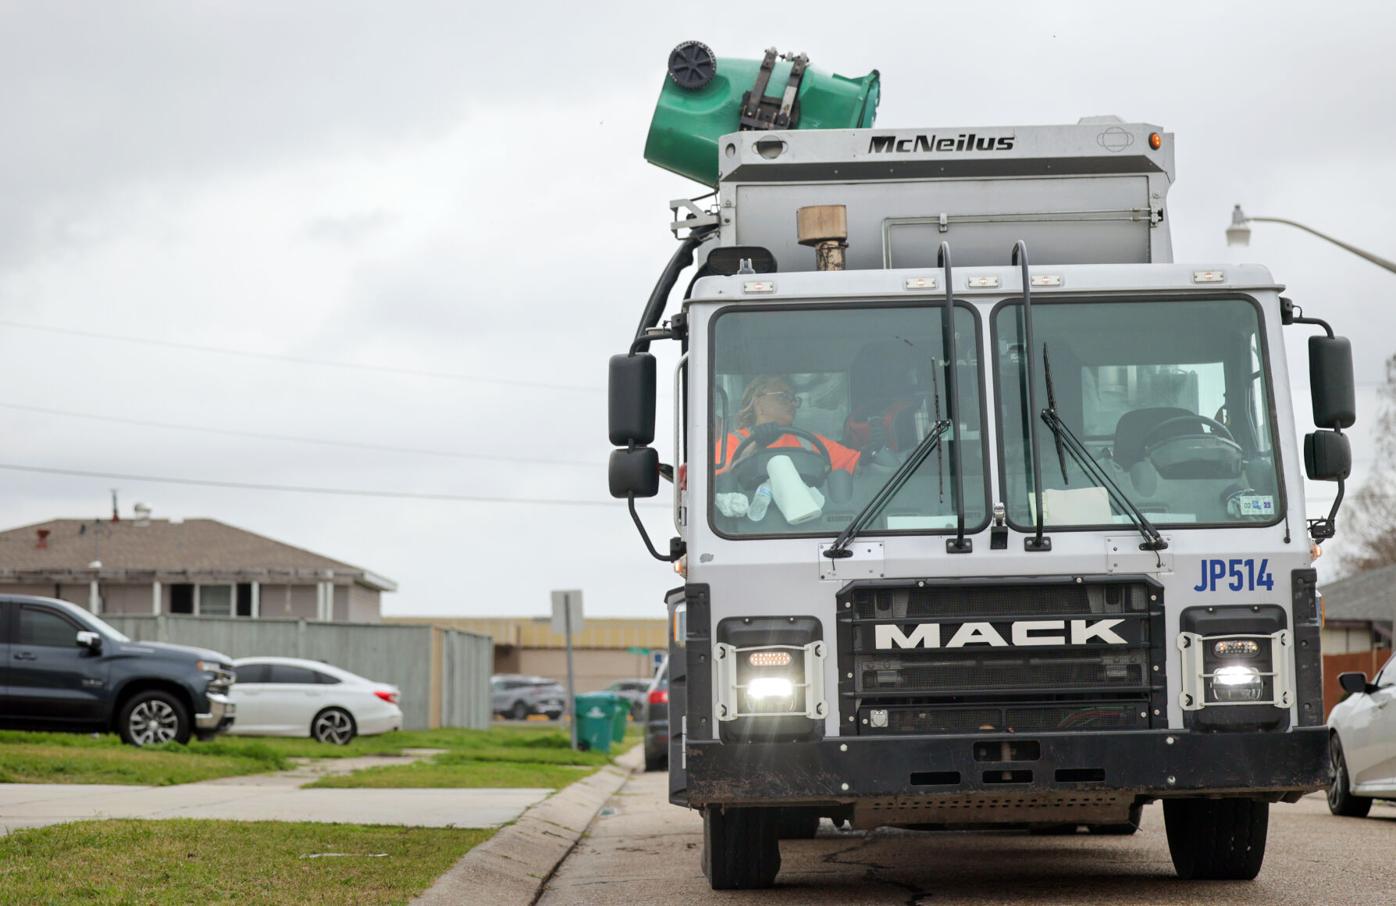 New garbage bins are big and 'husky', and they're dividing Jefferson Parish, Local Politics